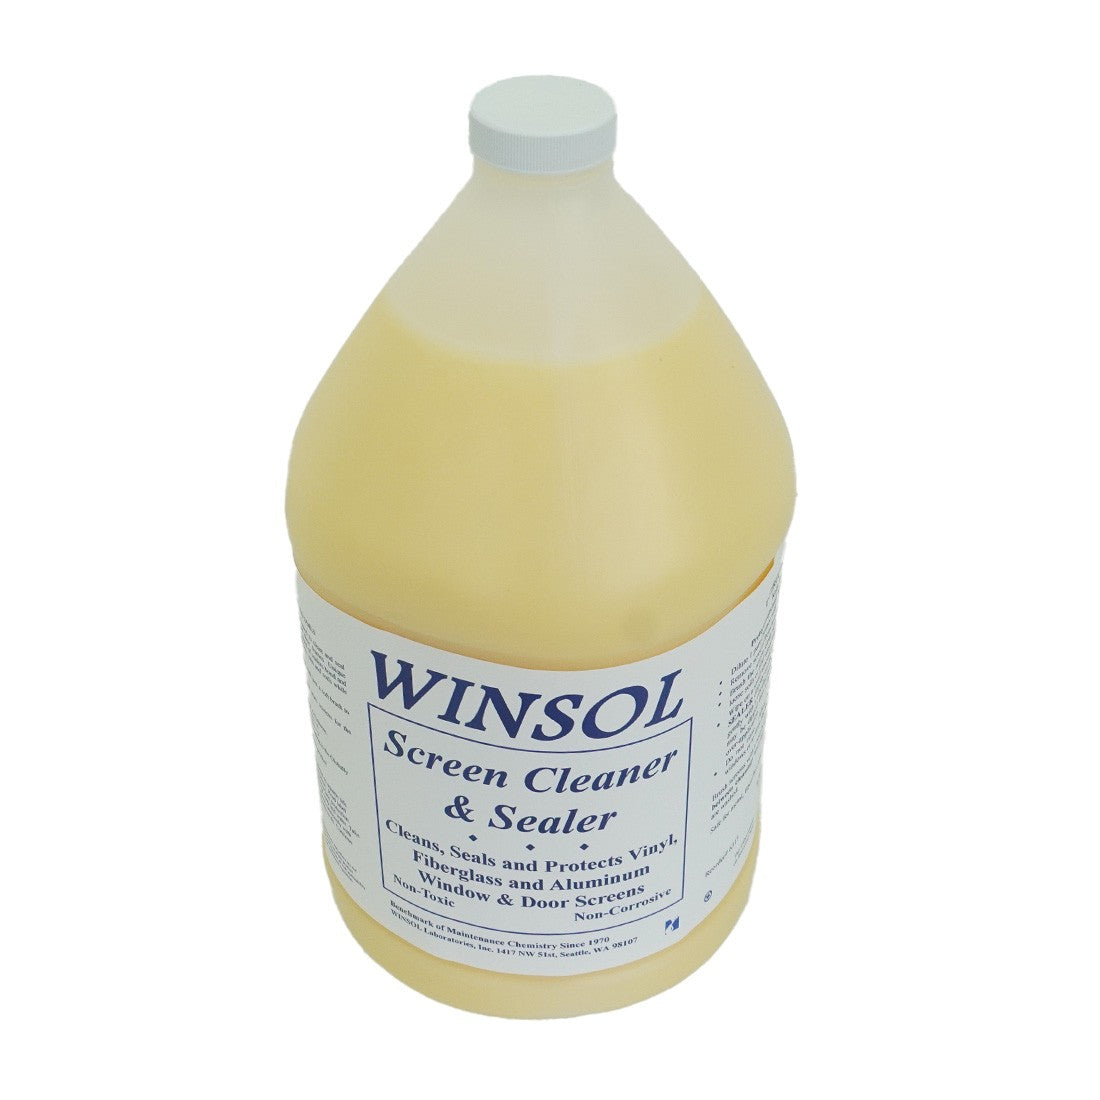 Winsol Screen Cleaner and Sealer Top Angle View